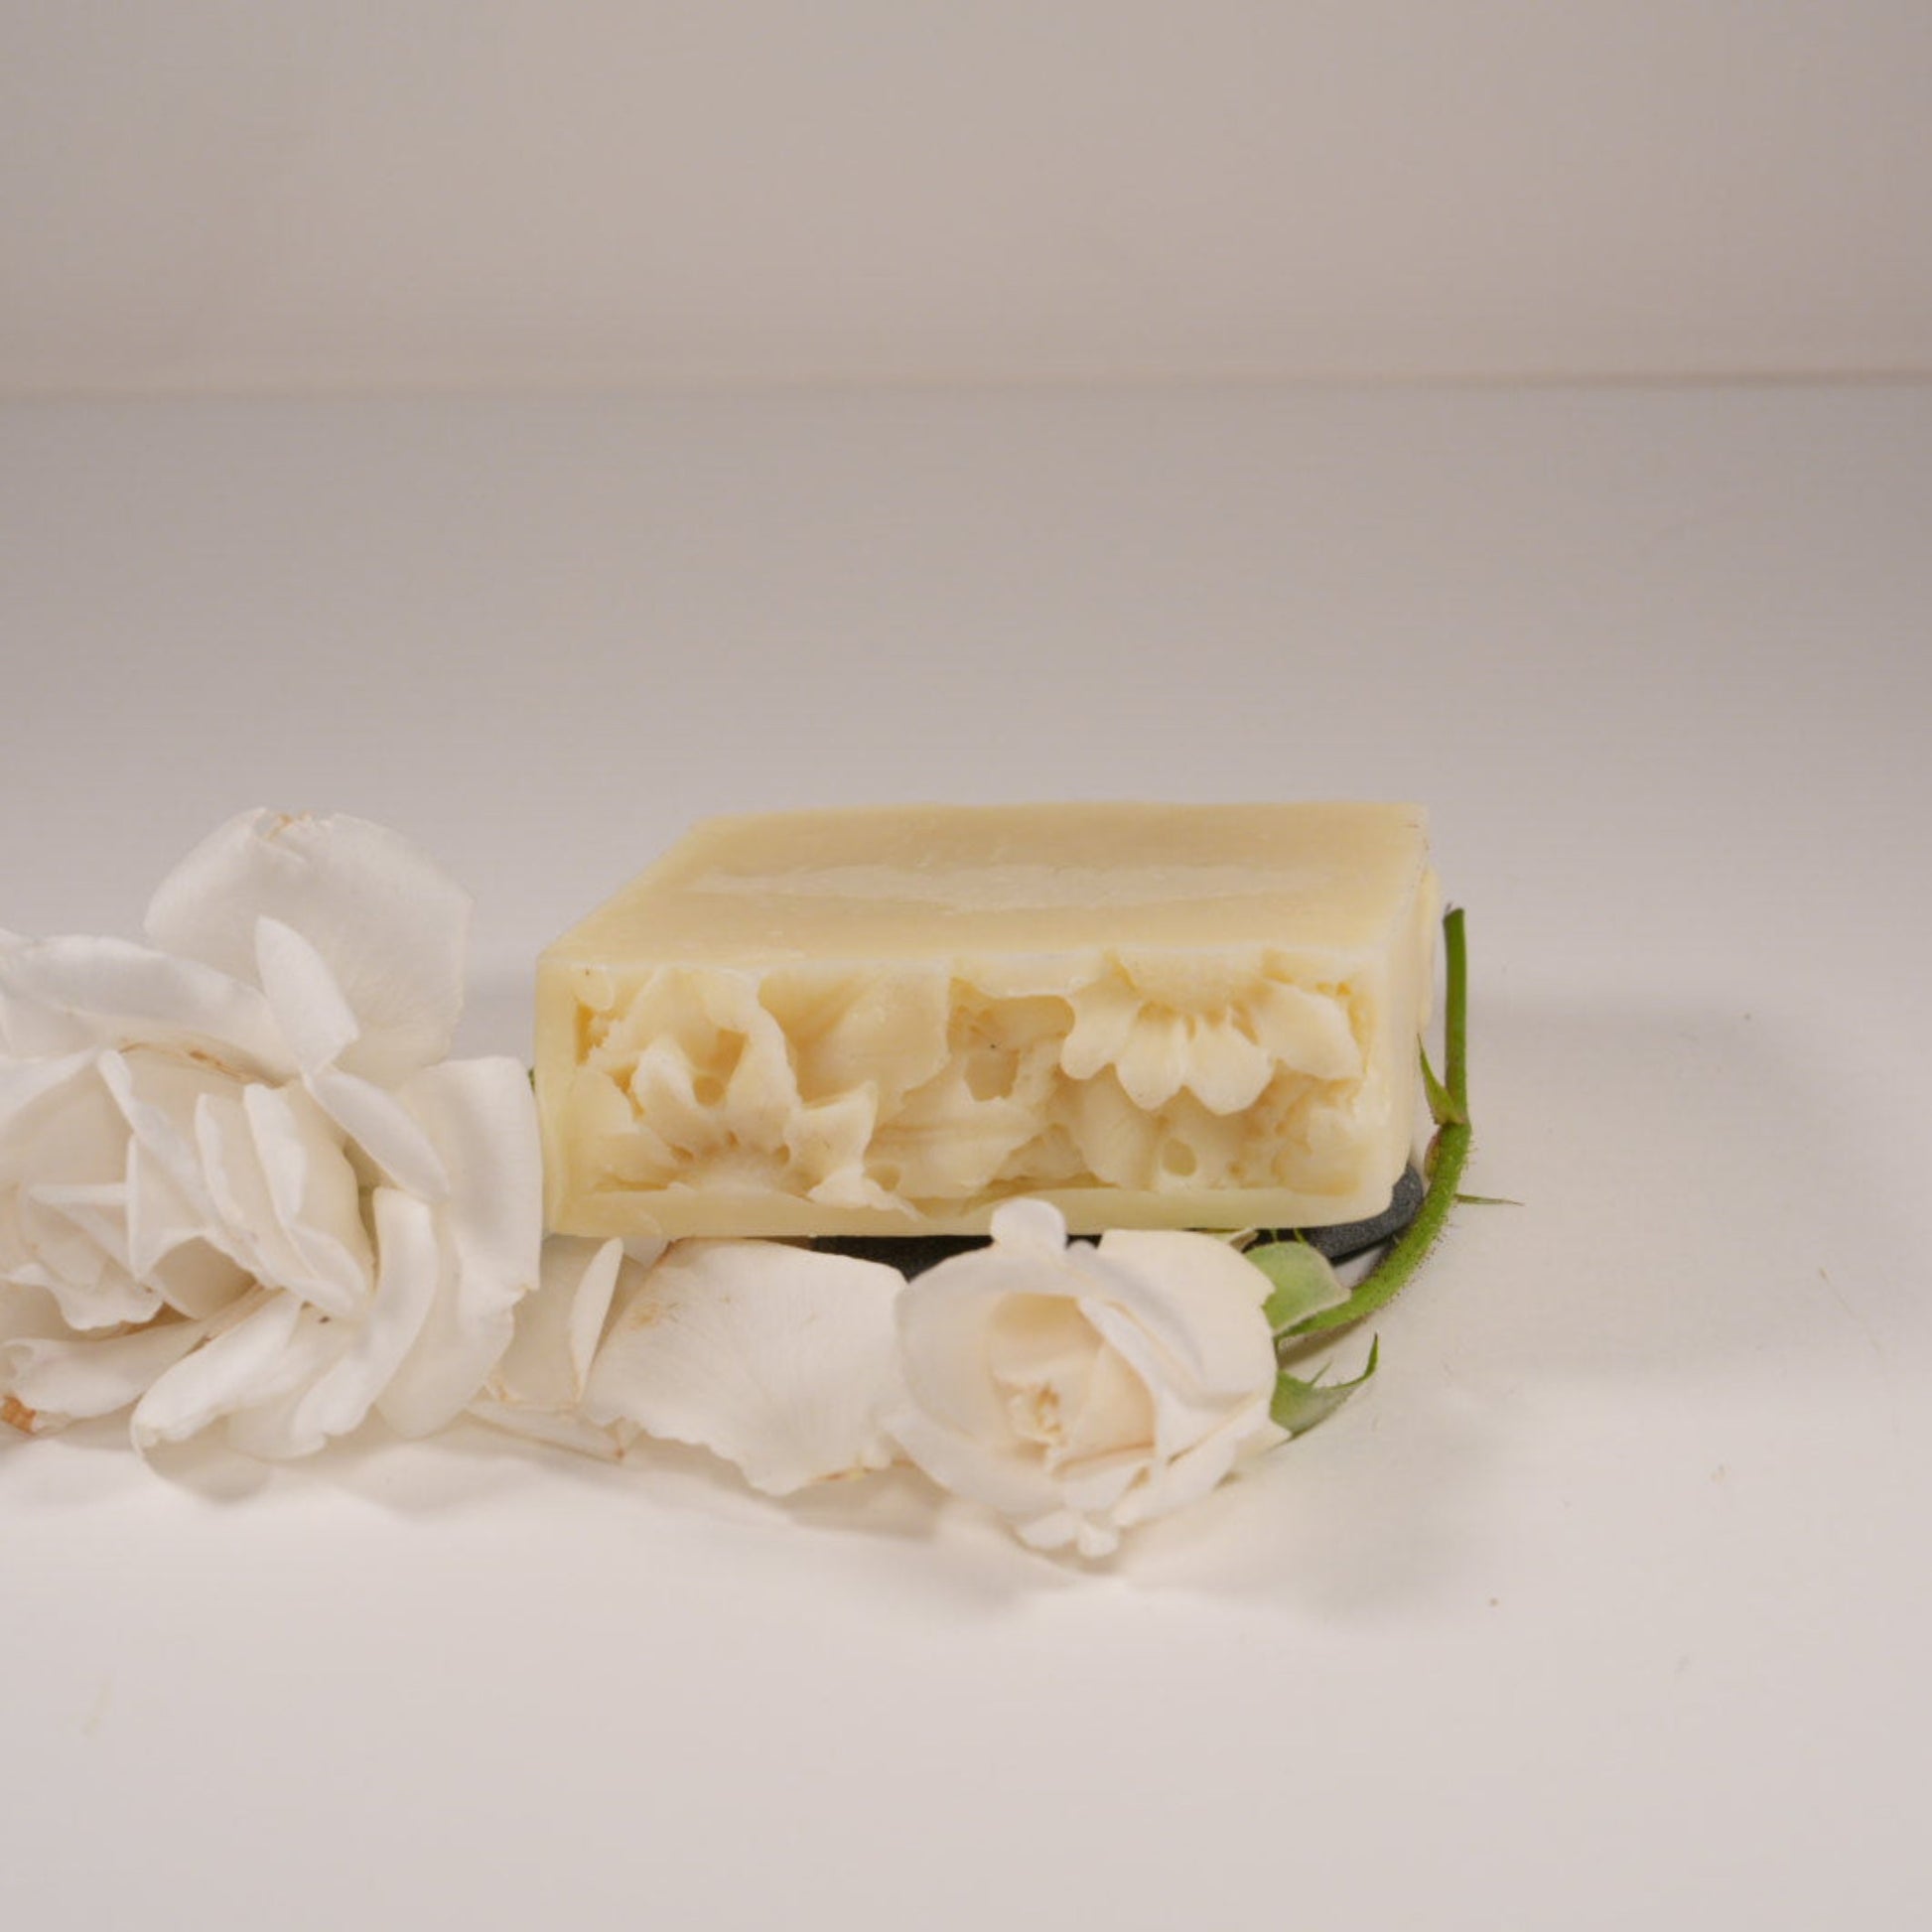 Eucalyptus Cleansing Soap Bar with roses